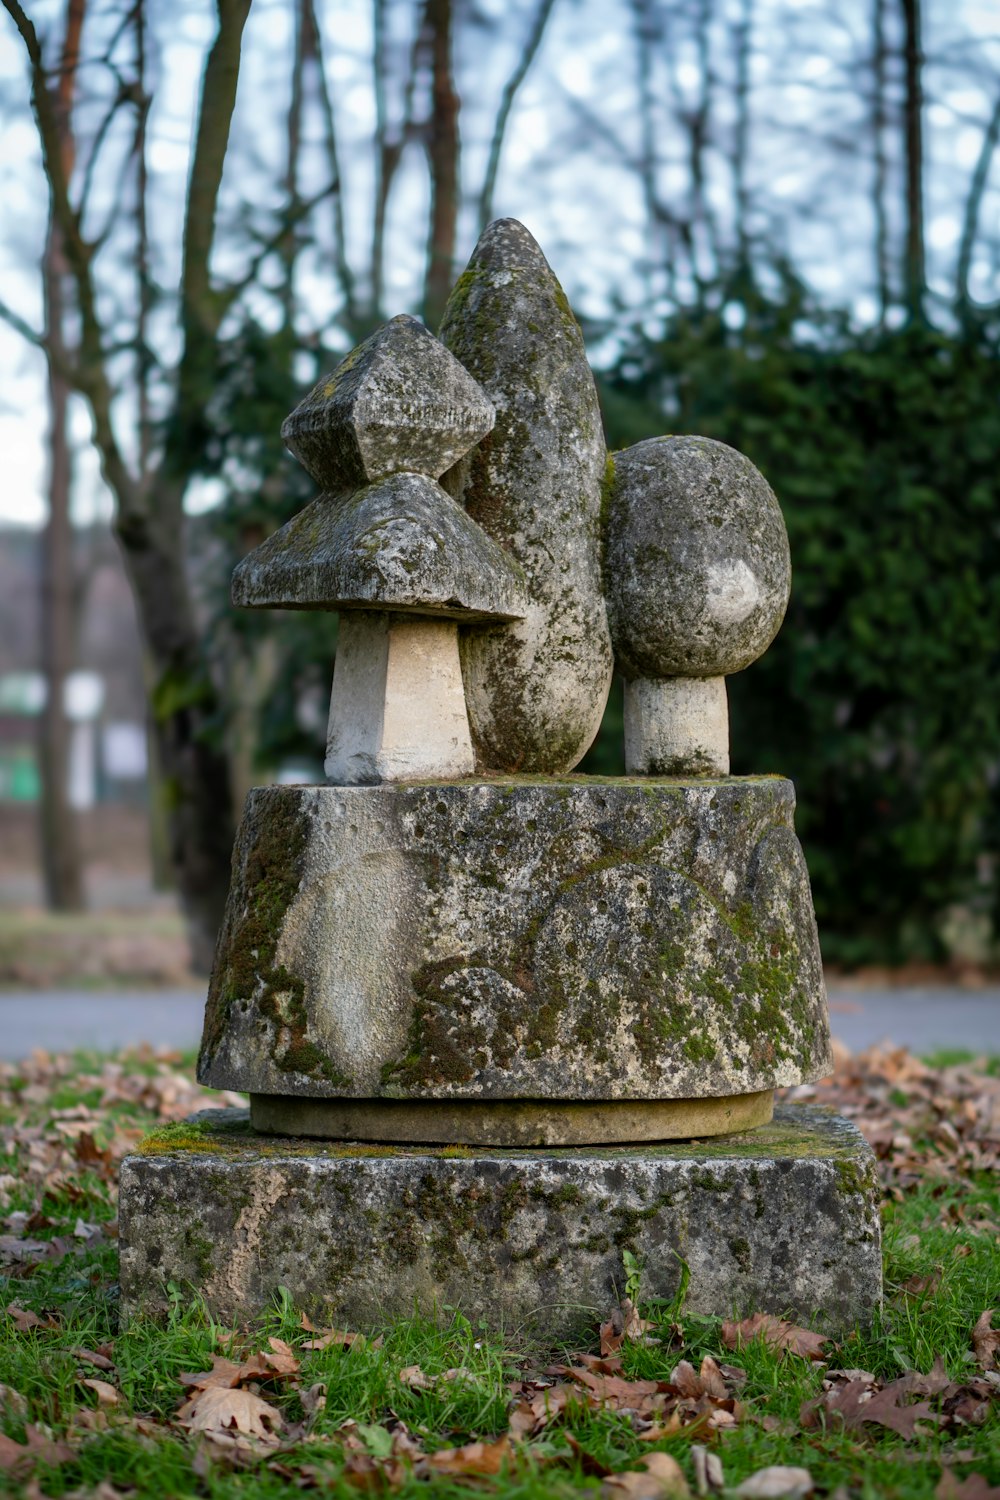 a stone sculpture in a park with trees in the background